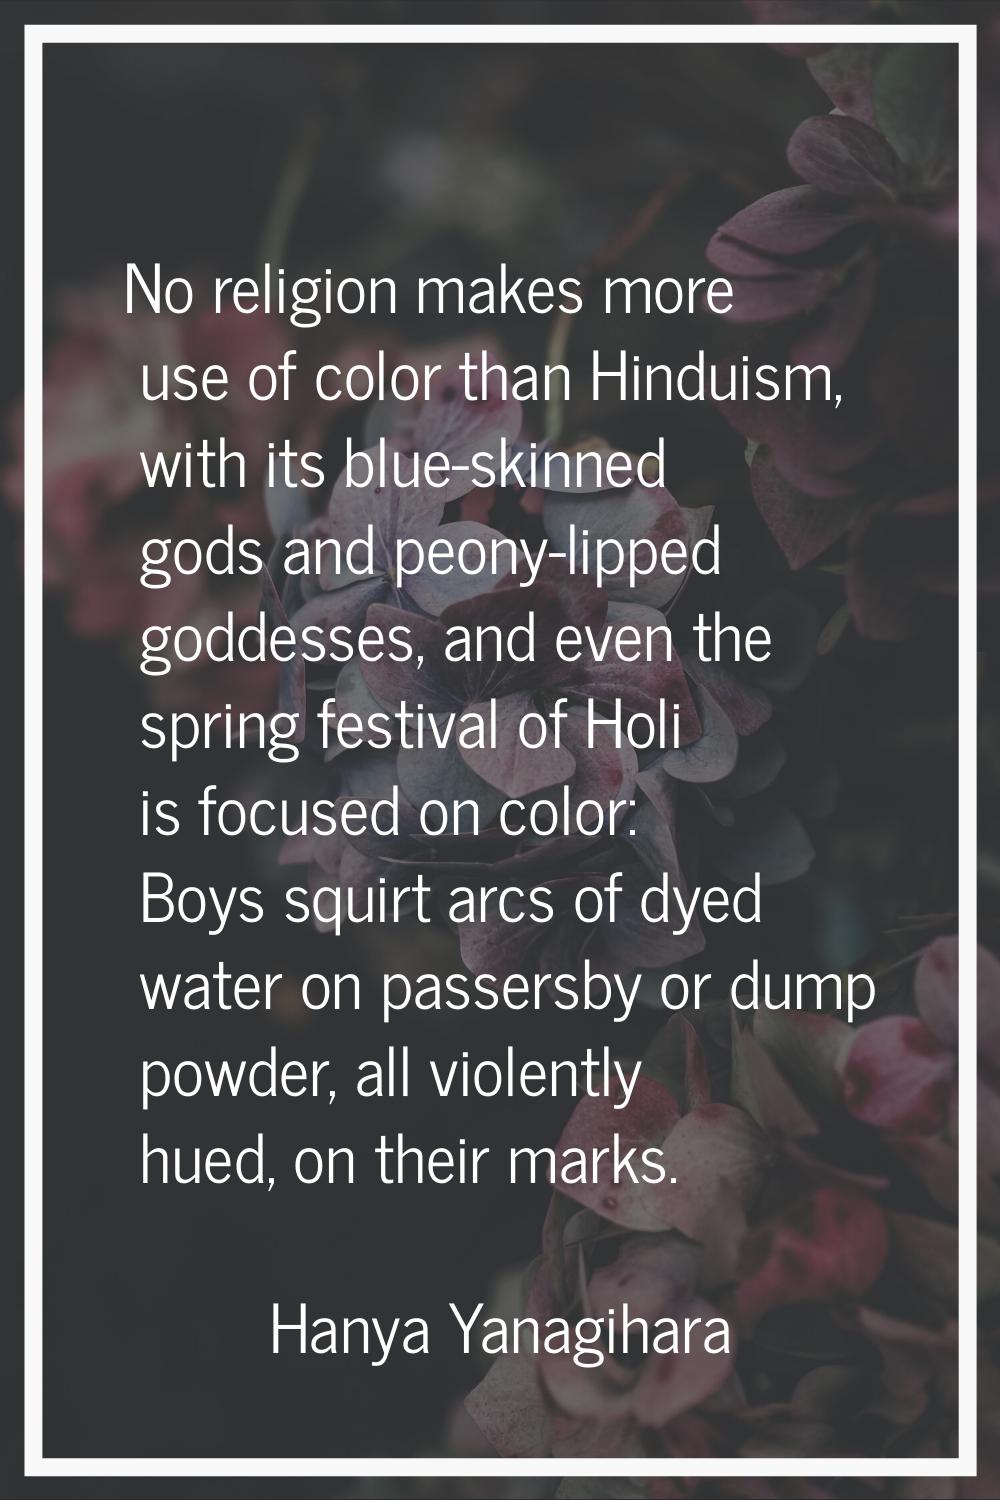 No religion makes more use of color than Hinduism, with its blue-skinned gods and peony-lipped godd